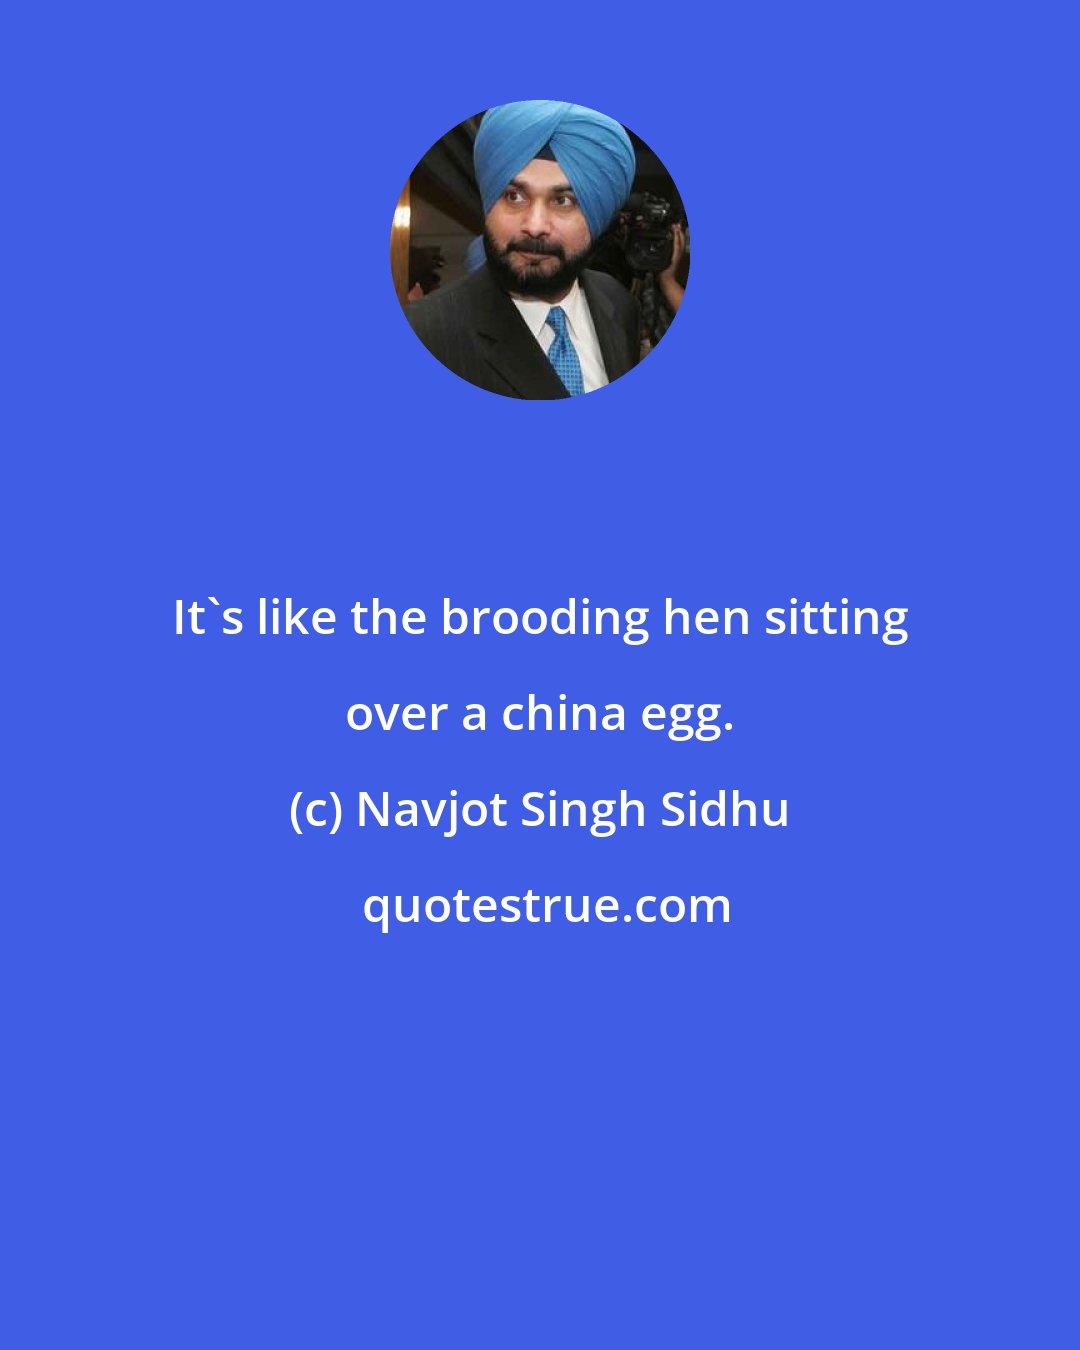 Navjot Singh Sidhu: It's like the brooding hen sitting over a china egg.